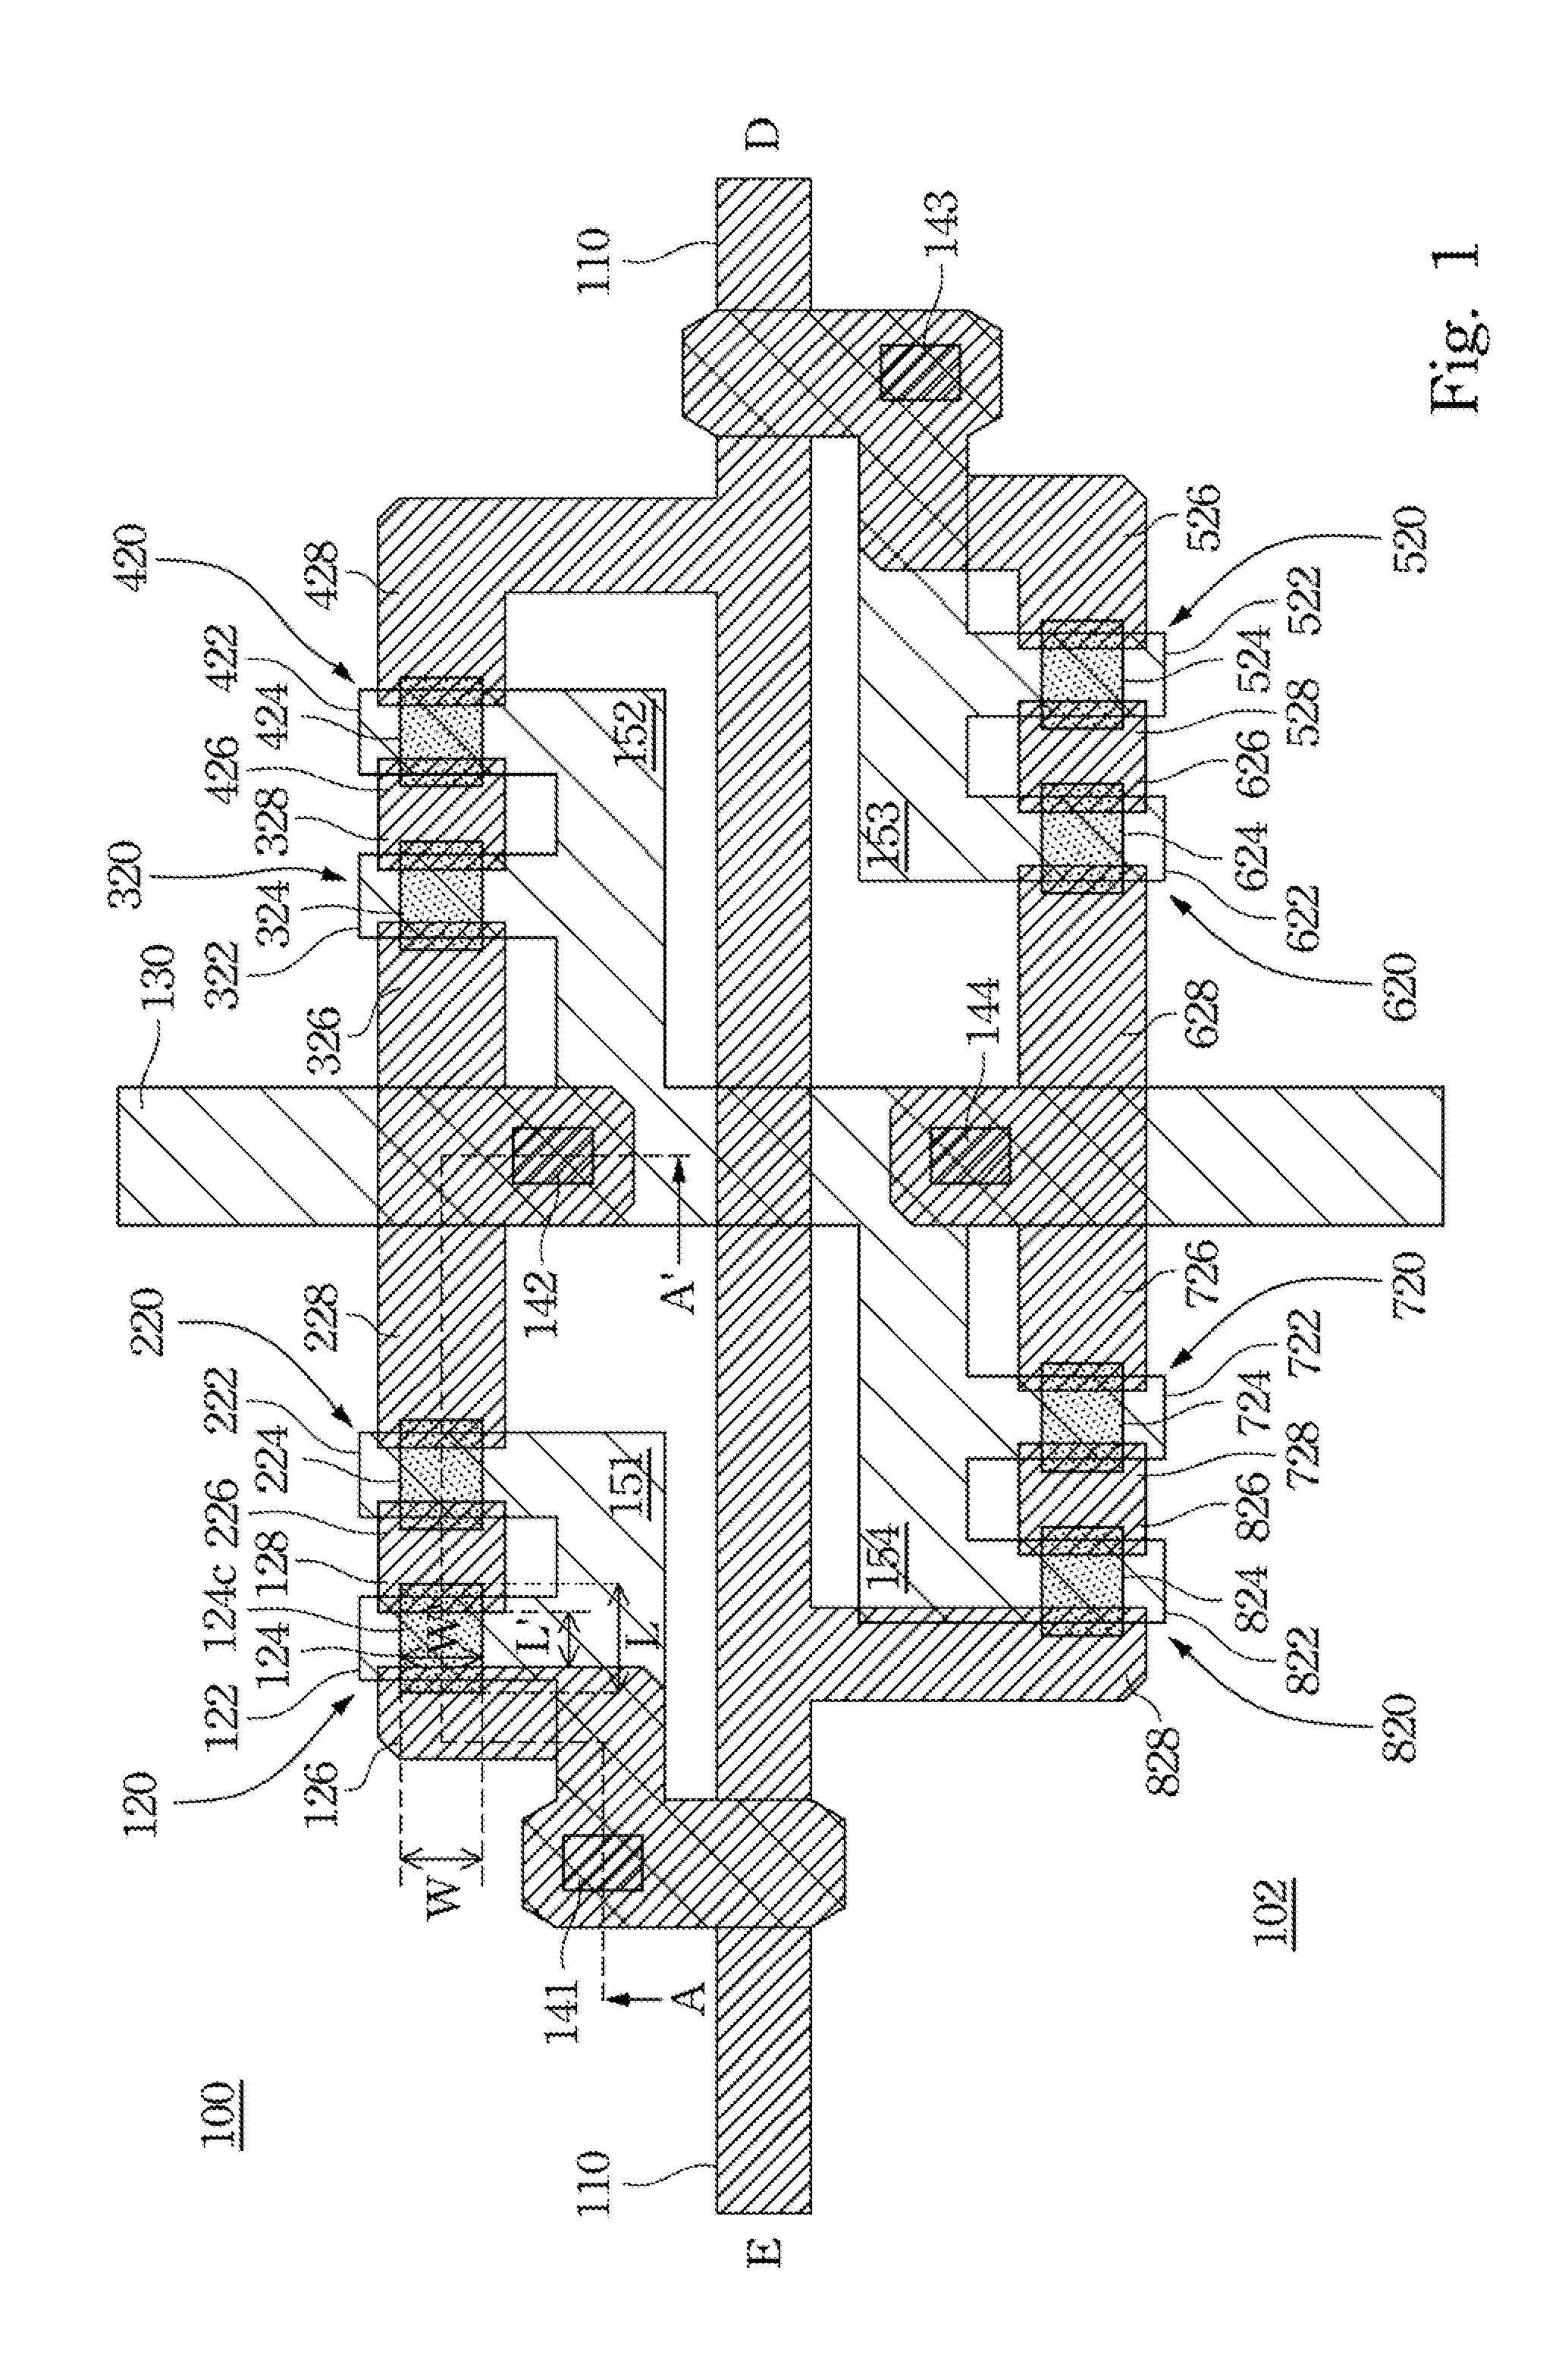 Electrostatic discharge protection structure for an active array substrate